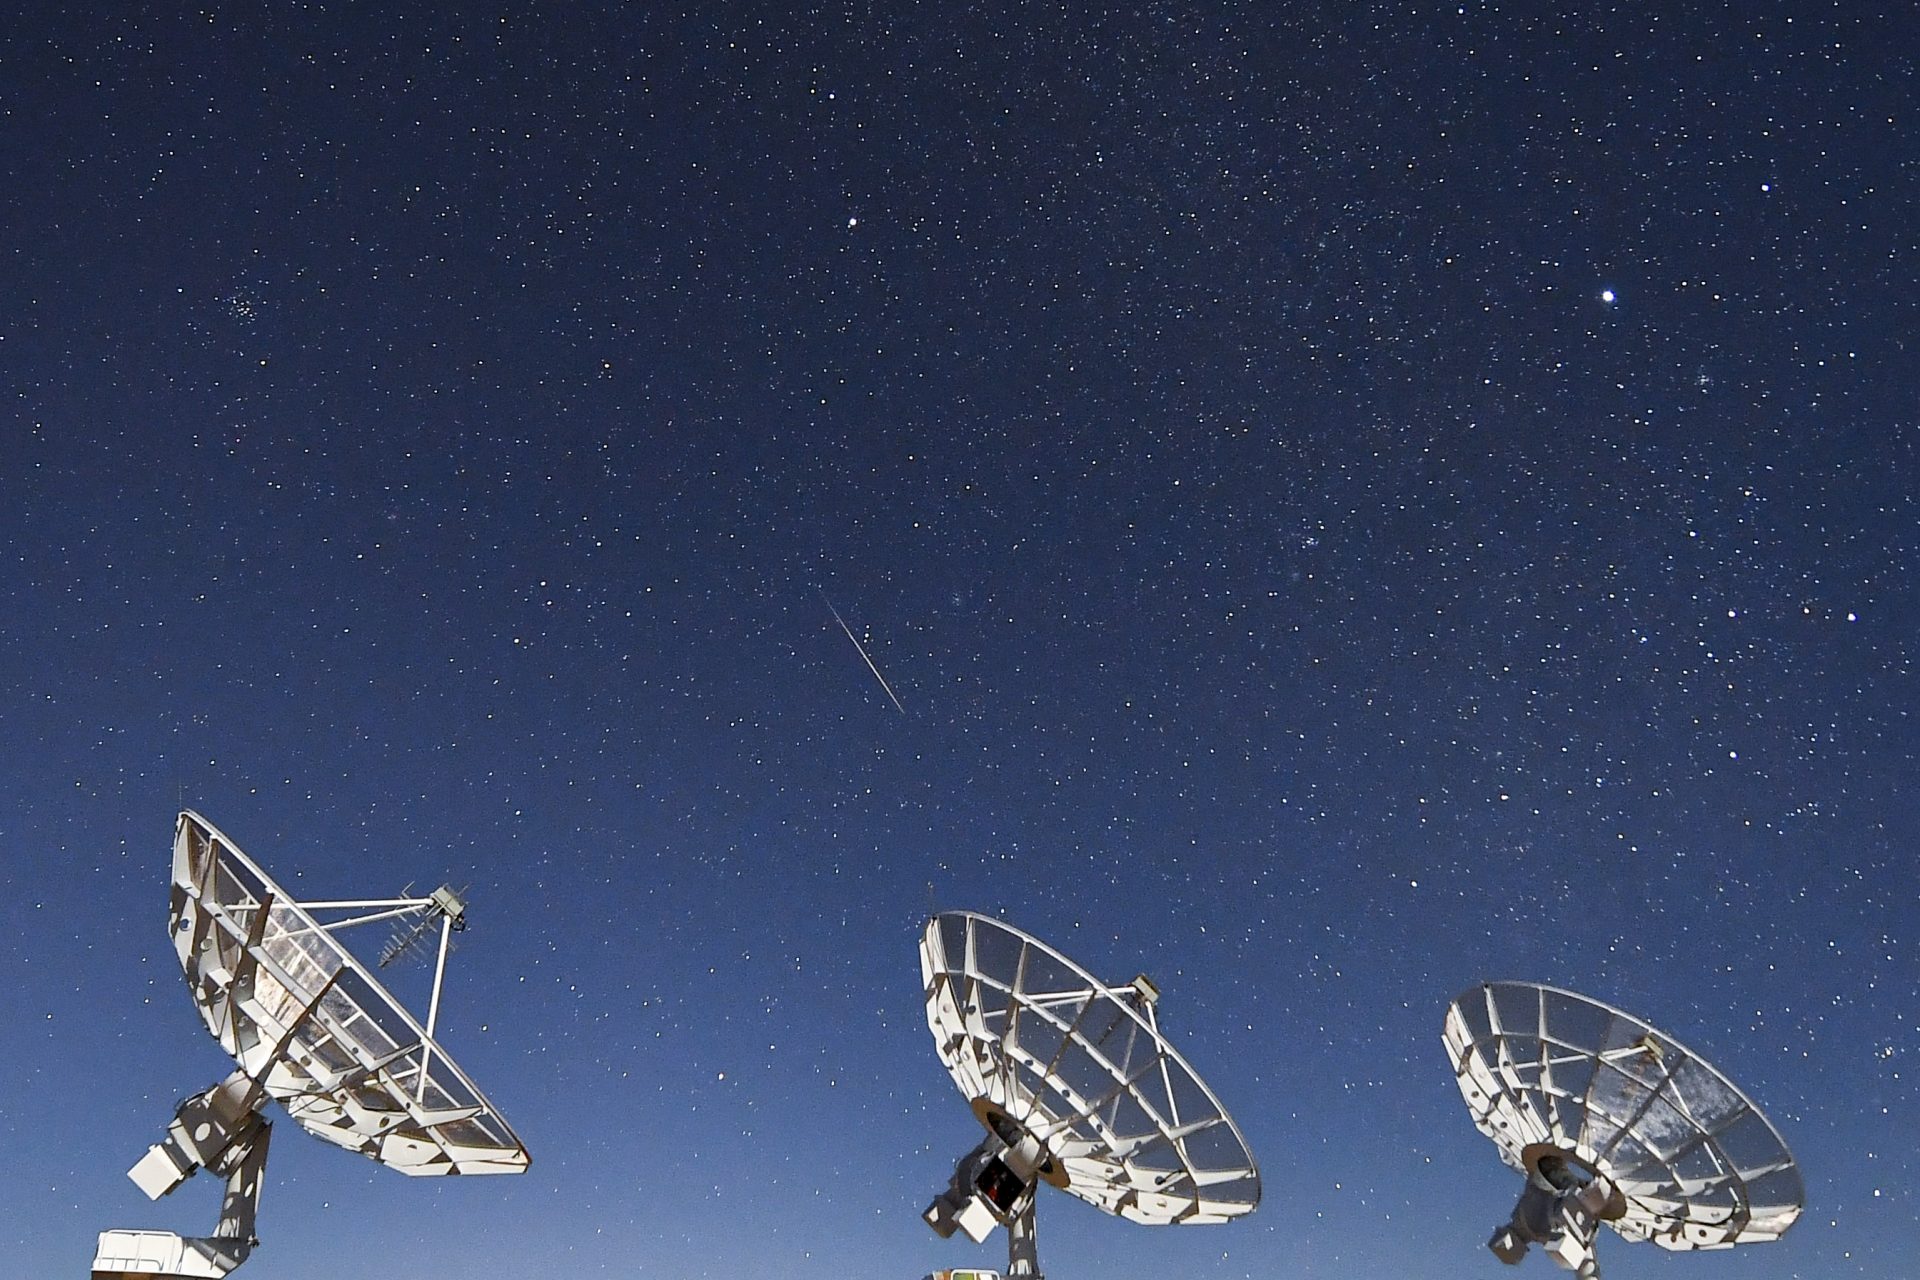 A weird radio signal led astronomers to an unusual discovery